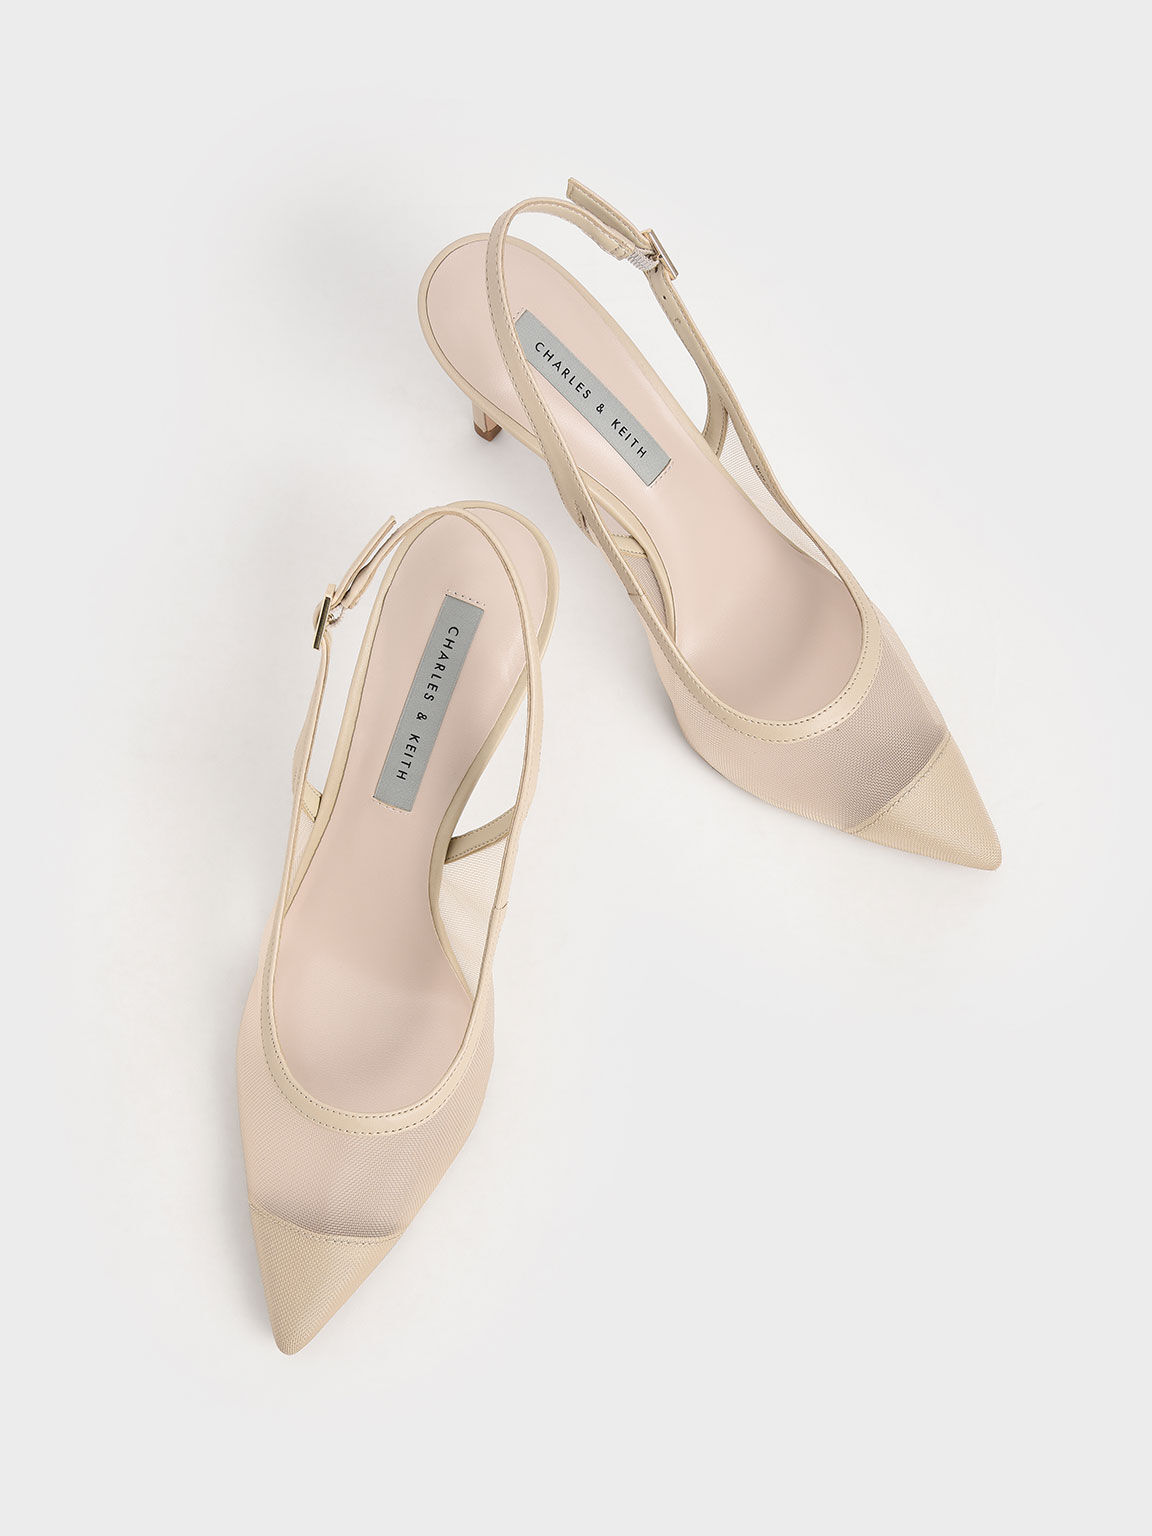 CHARLES & KEITH Heels for Women - Vestiaire Collective